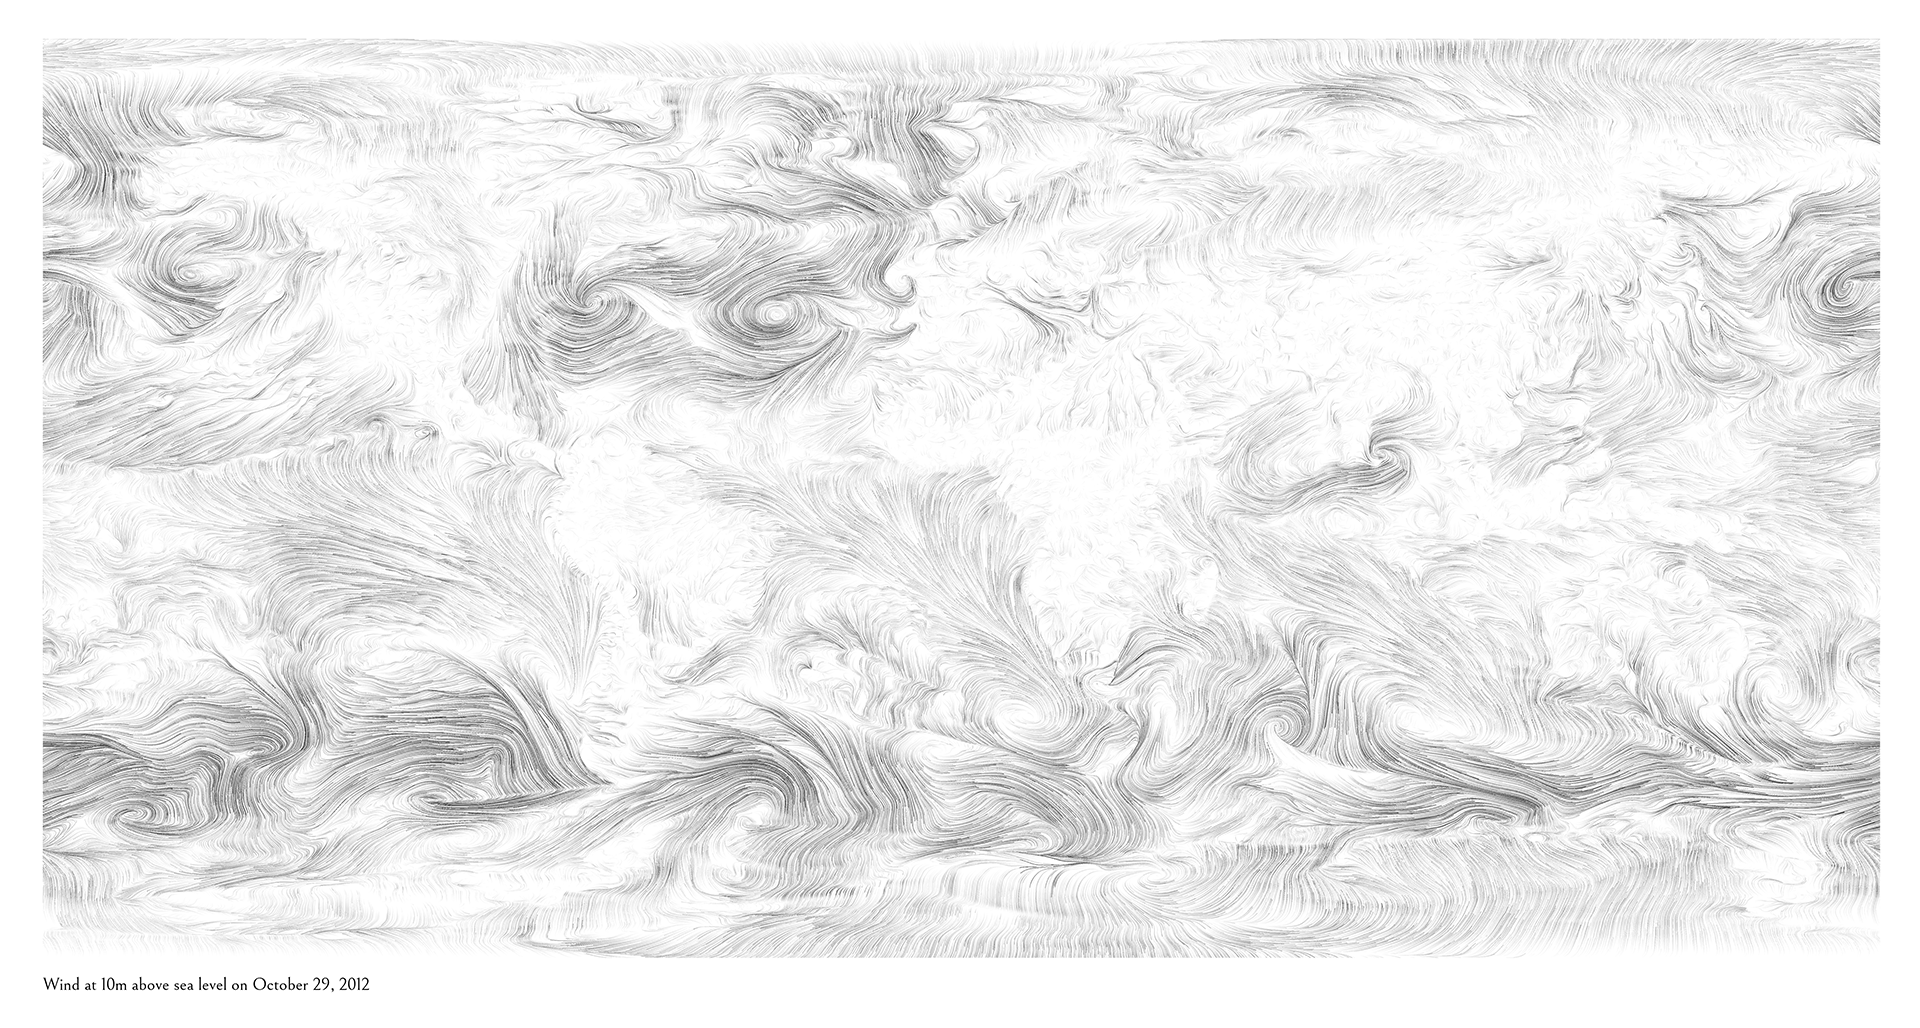 Wind map of the world during Hurricane Sandy